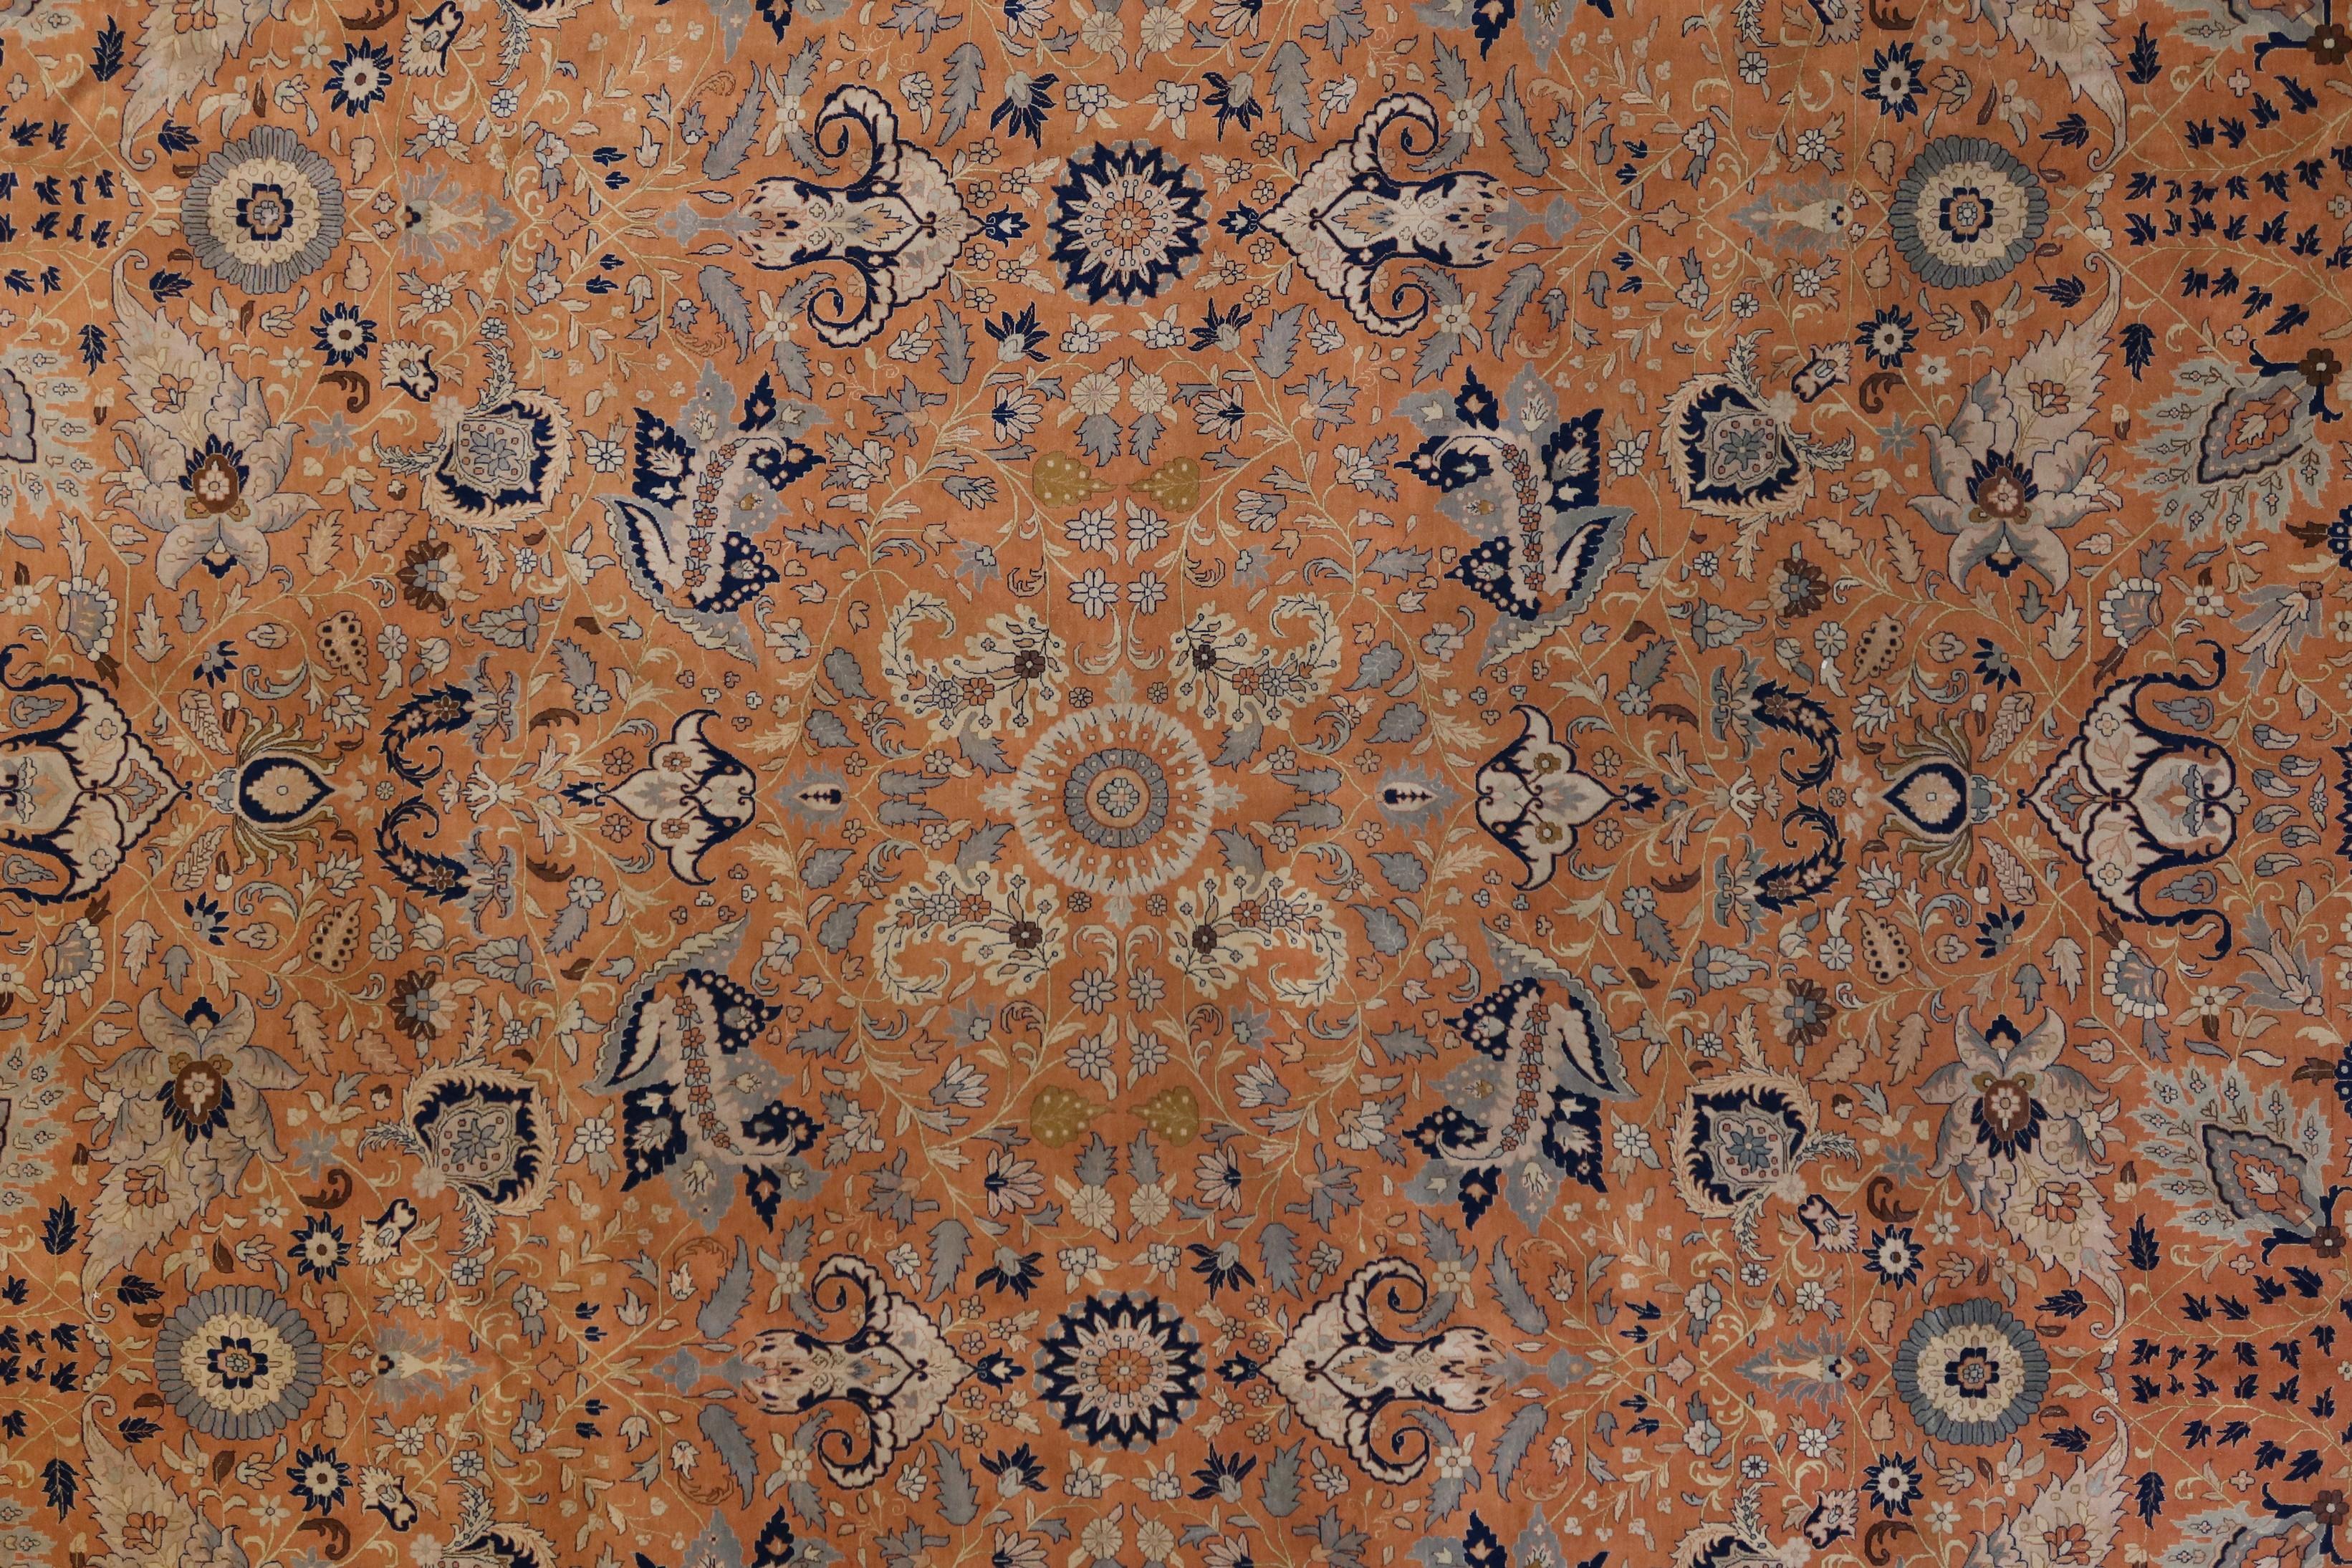 The Woven Arts rug collection is a highly accurate recreation of the original Hadji Jalili Tabriz rugs of the late 19th century and early 20th century. High quality New Zealand yarn is finely hand-knotted to create these luxury rugs that are